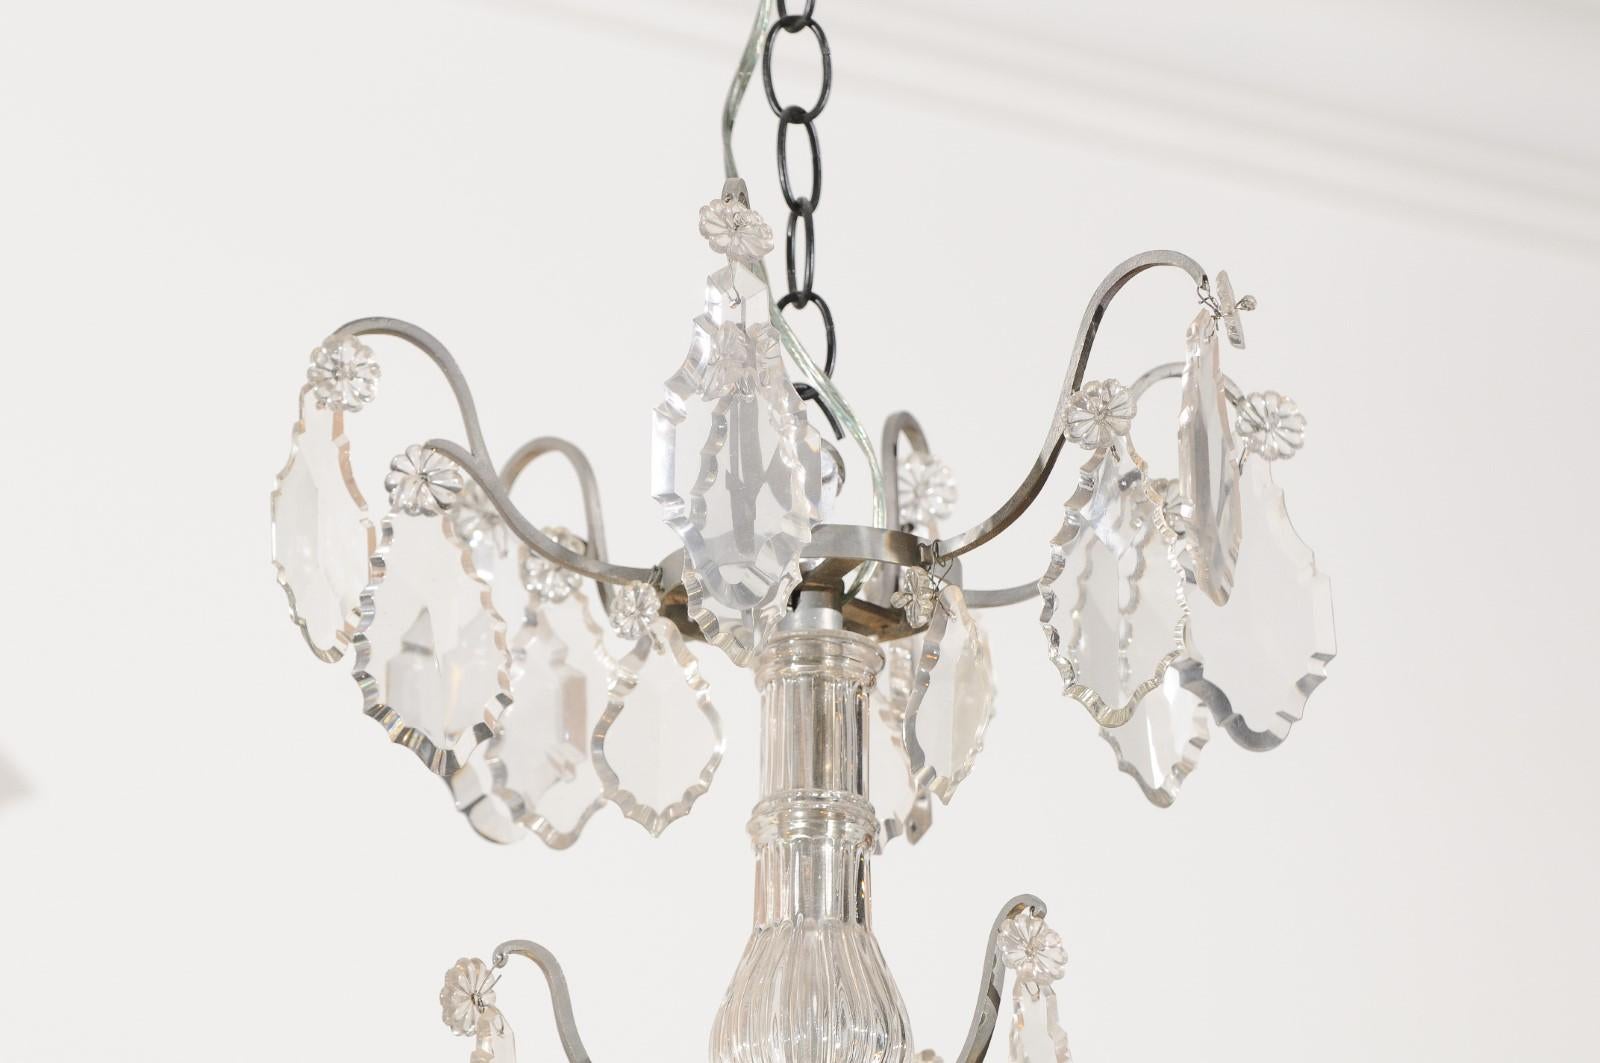 French 19th Century Six-Light Crystal Chandelier with Silvered Iron Armature In Good Condition For Sale In Atlanta, GA